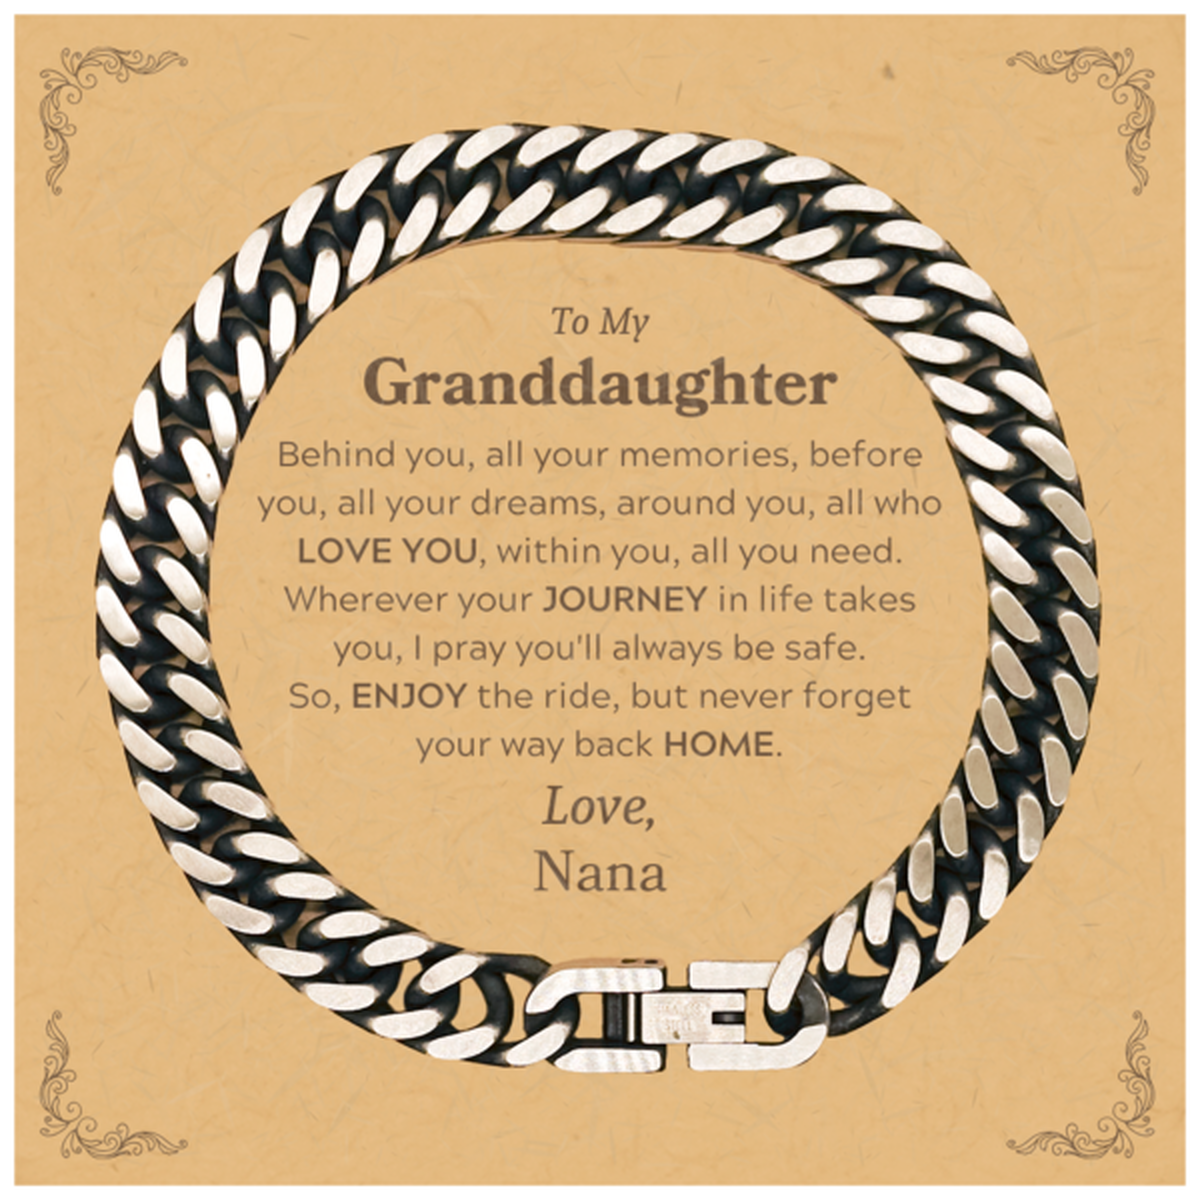 To My Granddaughter Graduation Gifts from Nana, Granddaughter Cuban Link Chain Bracelet Christmas Birthday Gifts for Granddaughter Behind you, all your memories, before you, all your dreams. Love, Nana